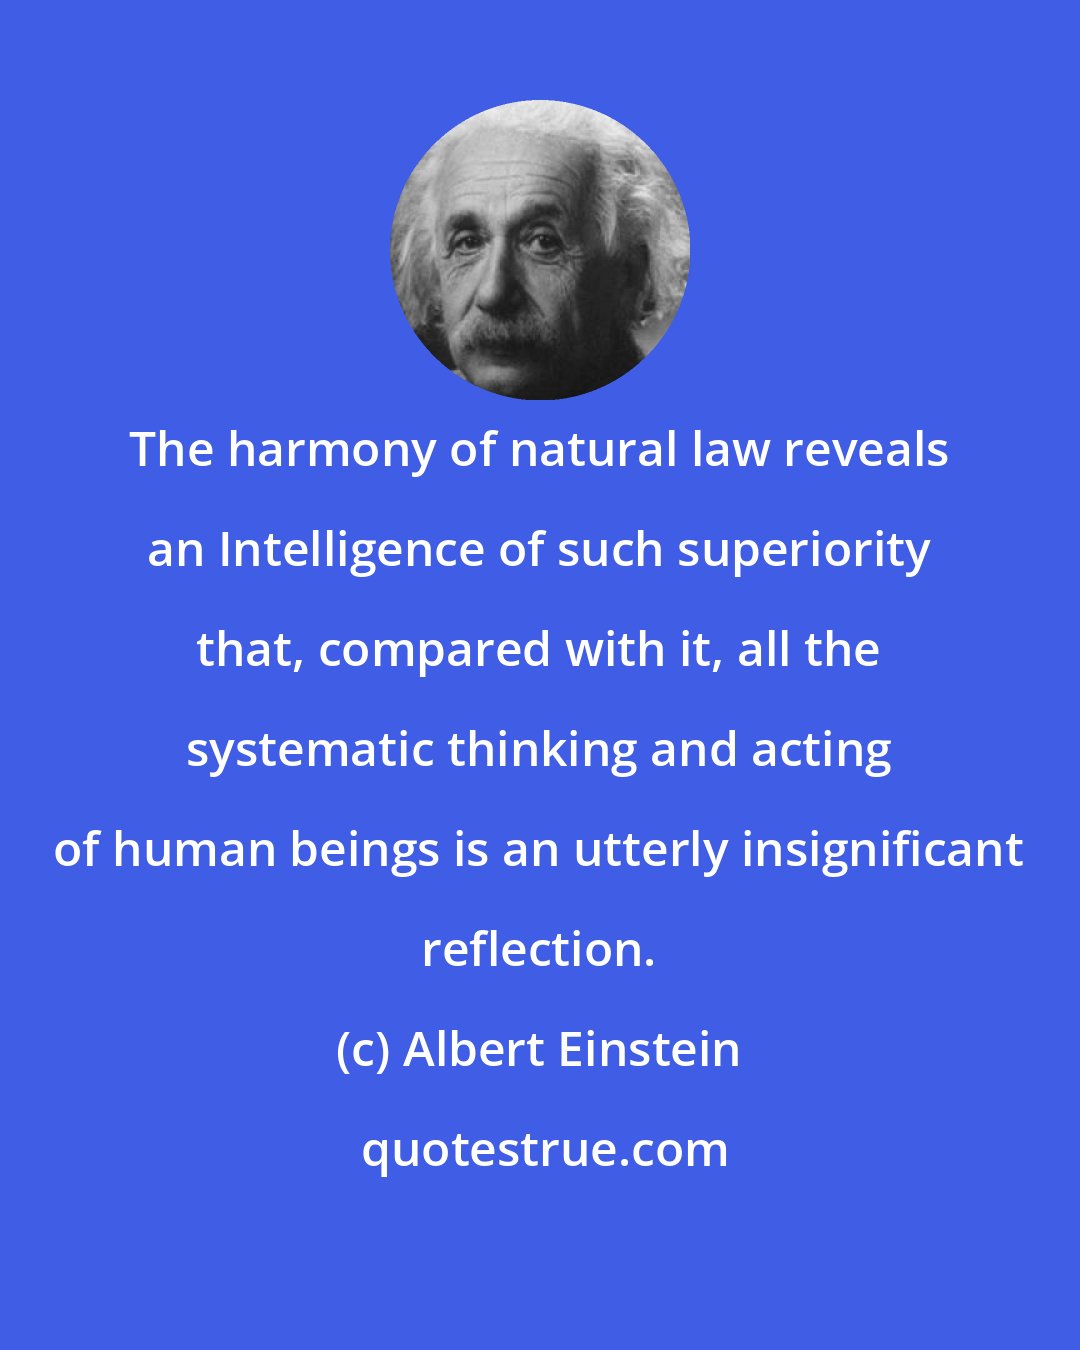 Albert Einstein: The harmony of natural law reveals an Intelligence of such superiority that, compared with it, all the systematic thinking and acting of human beings is an utterly insignificant reflection.